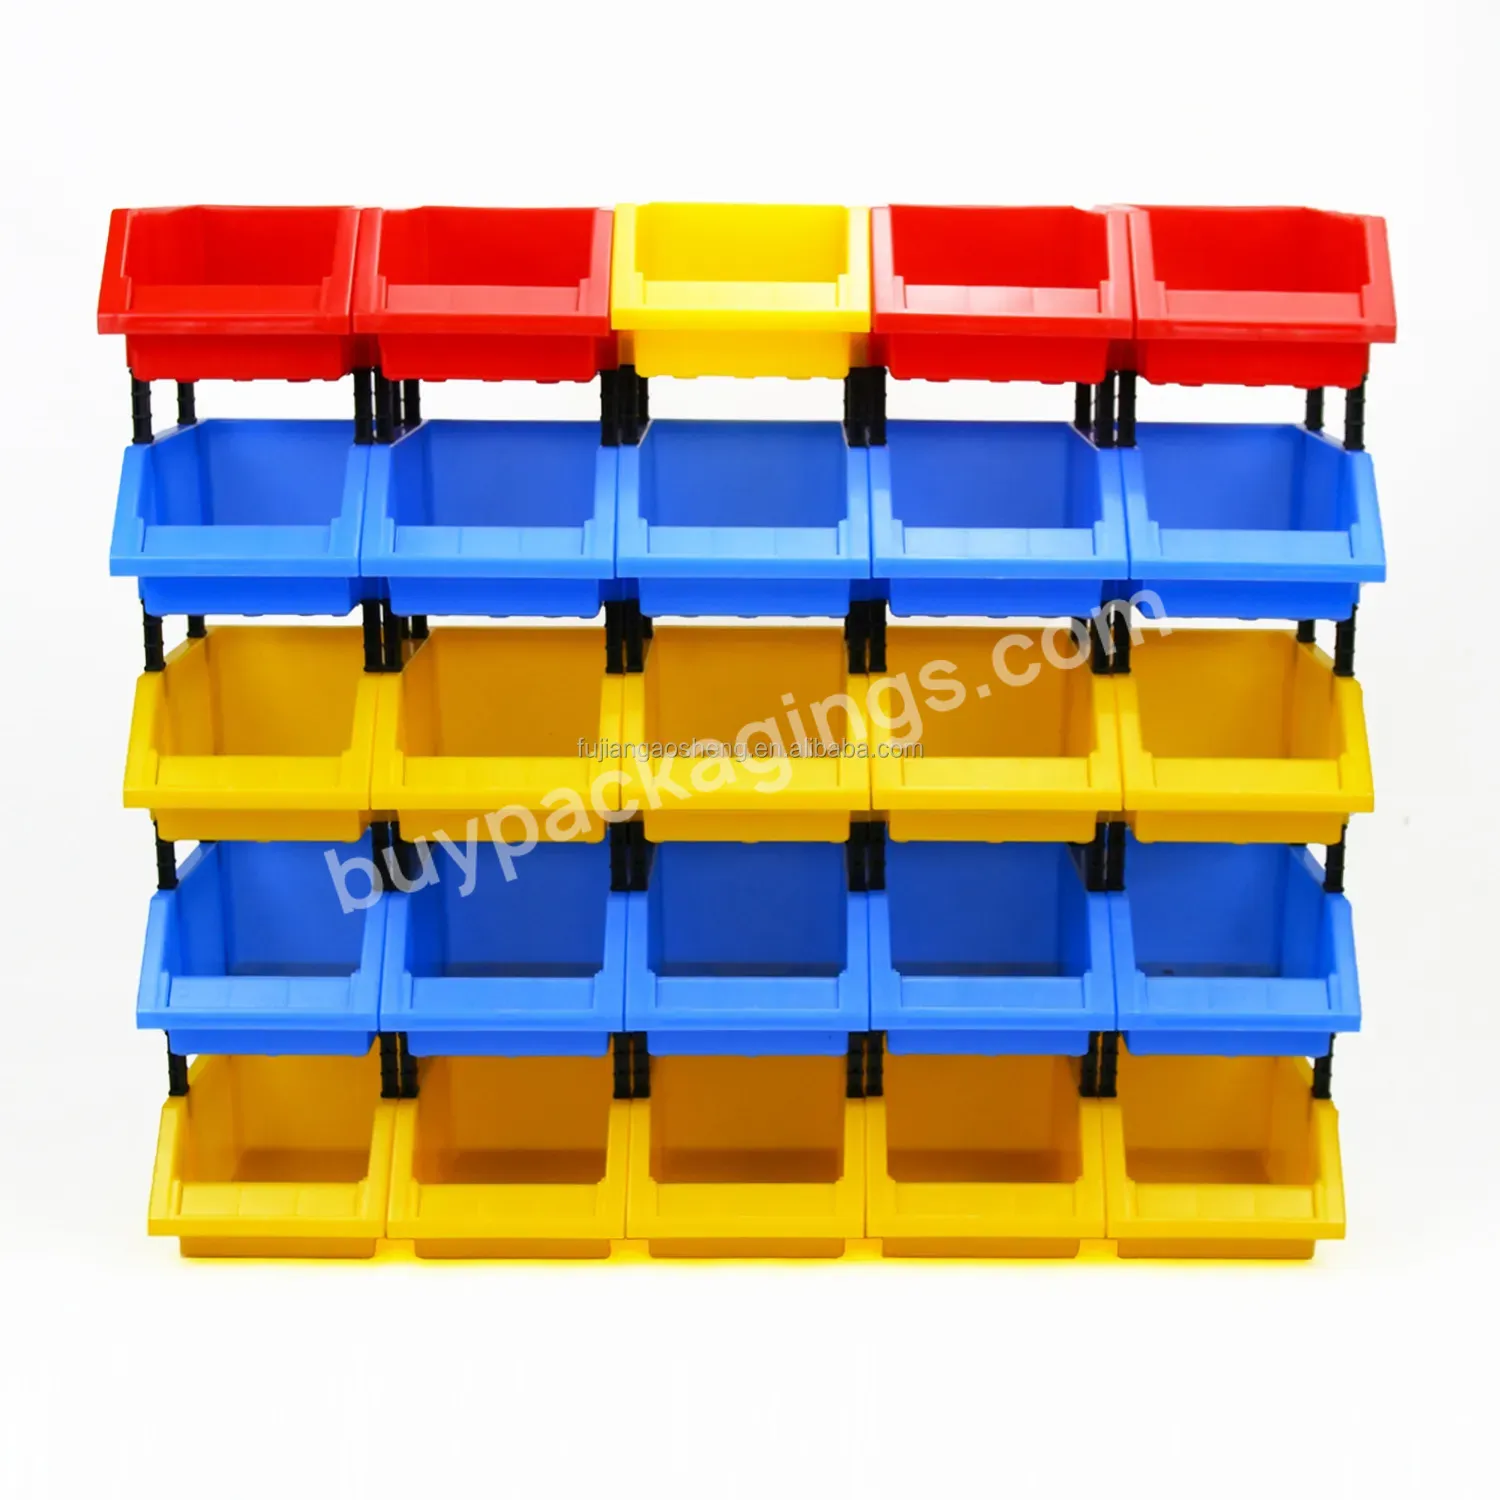 High Quality Shelf Bins For Industrial Plastic Portable Boxes Plastic Stackable And Divisible Storage Shelf Bins - Buy Kids Plastic Storage Bins,Cheap Plastic Storage Bins,Stackable Bread Bin.